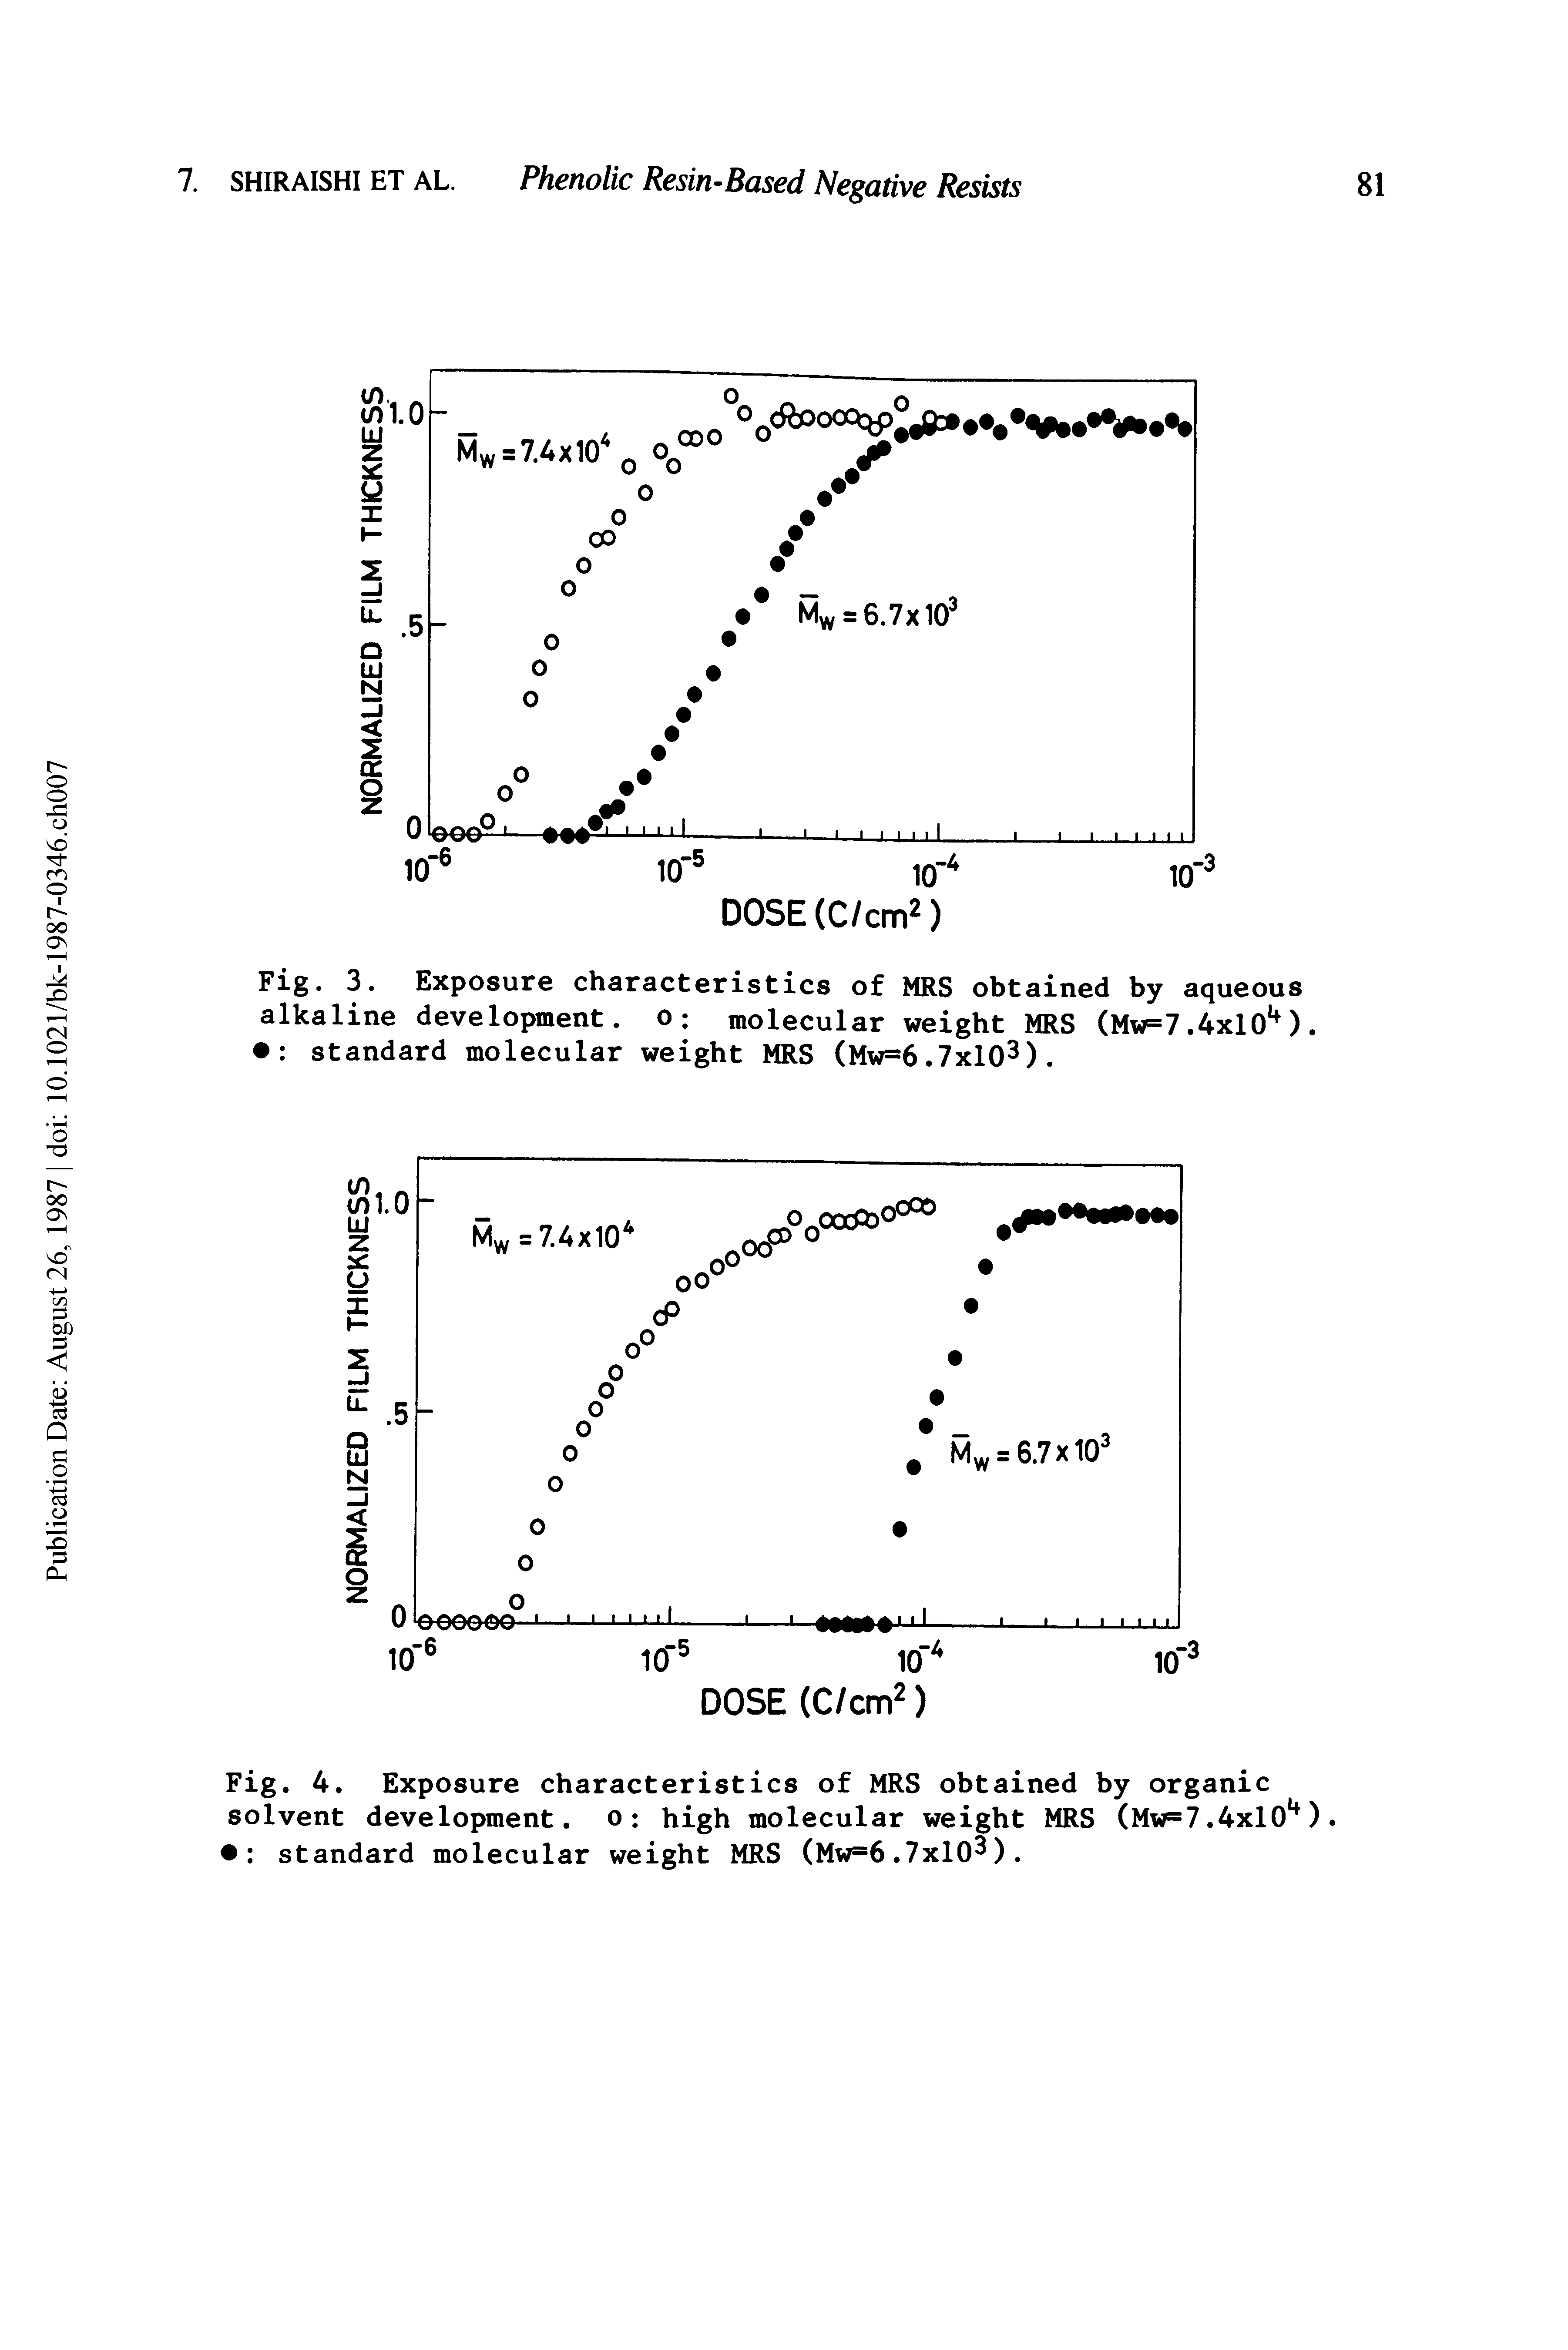 Fig. 3. Exposure characteristics of MRS obtained by aqueous alkaline development. O molecular weight MRS (Mw=7.4x10 ). standard molecular weight MRS (Mw=6.7x10 ).